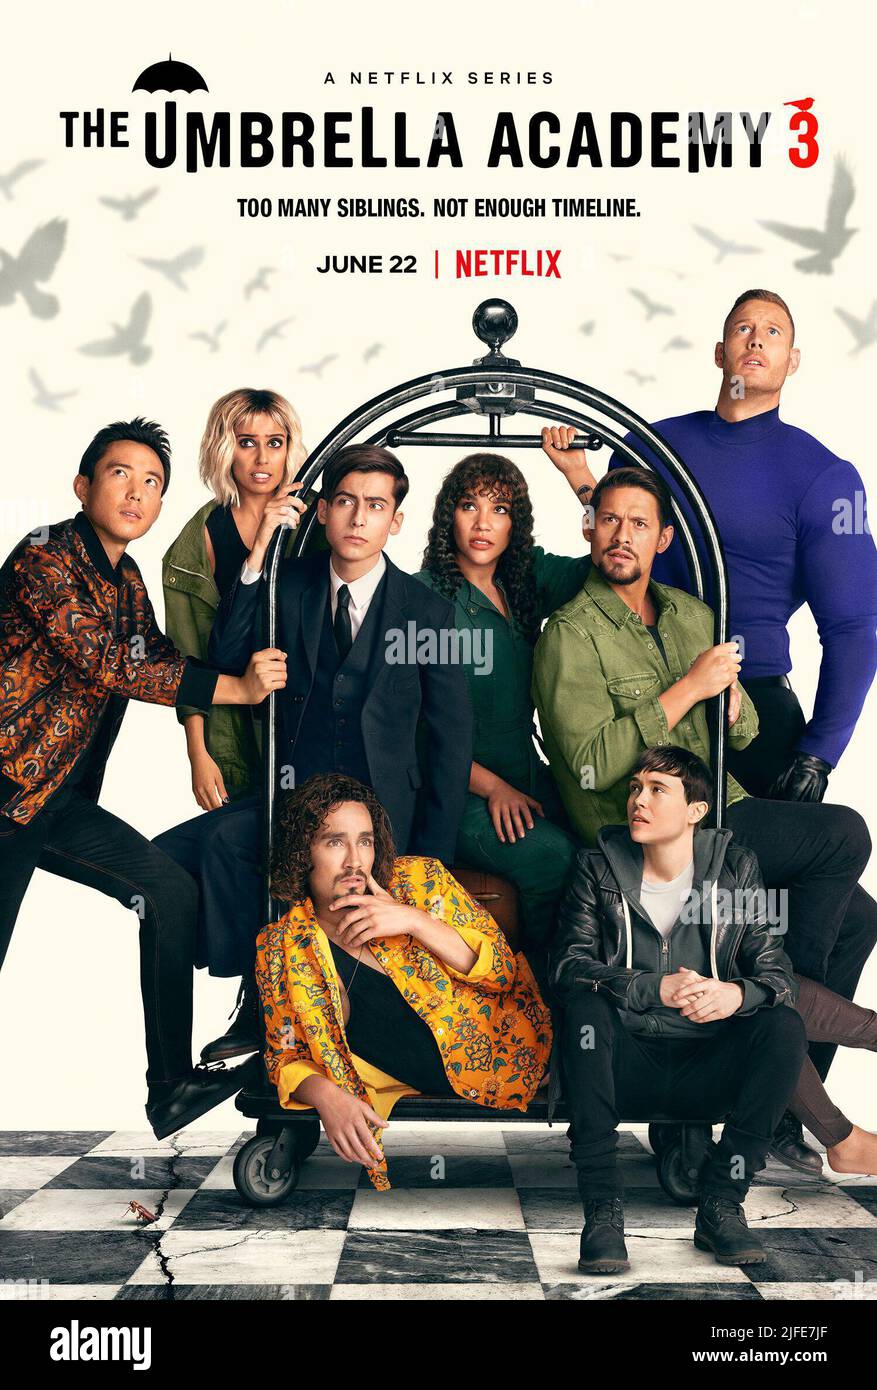 ELLIOT PAGE, ROBERT SHEEHAN, TOM HOPPER, AIDAN GALLAGHER, DAVID CASTAÑEDA, EMMY RAVER-LAMPMAN and JUSTIN H. MIN in THE UMBRELLA ACADEMY (2019), directed by JEREMY SLATER. Credit: NETFLIX / Album Stock Photo